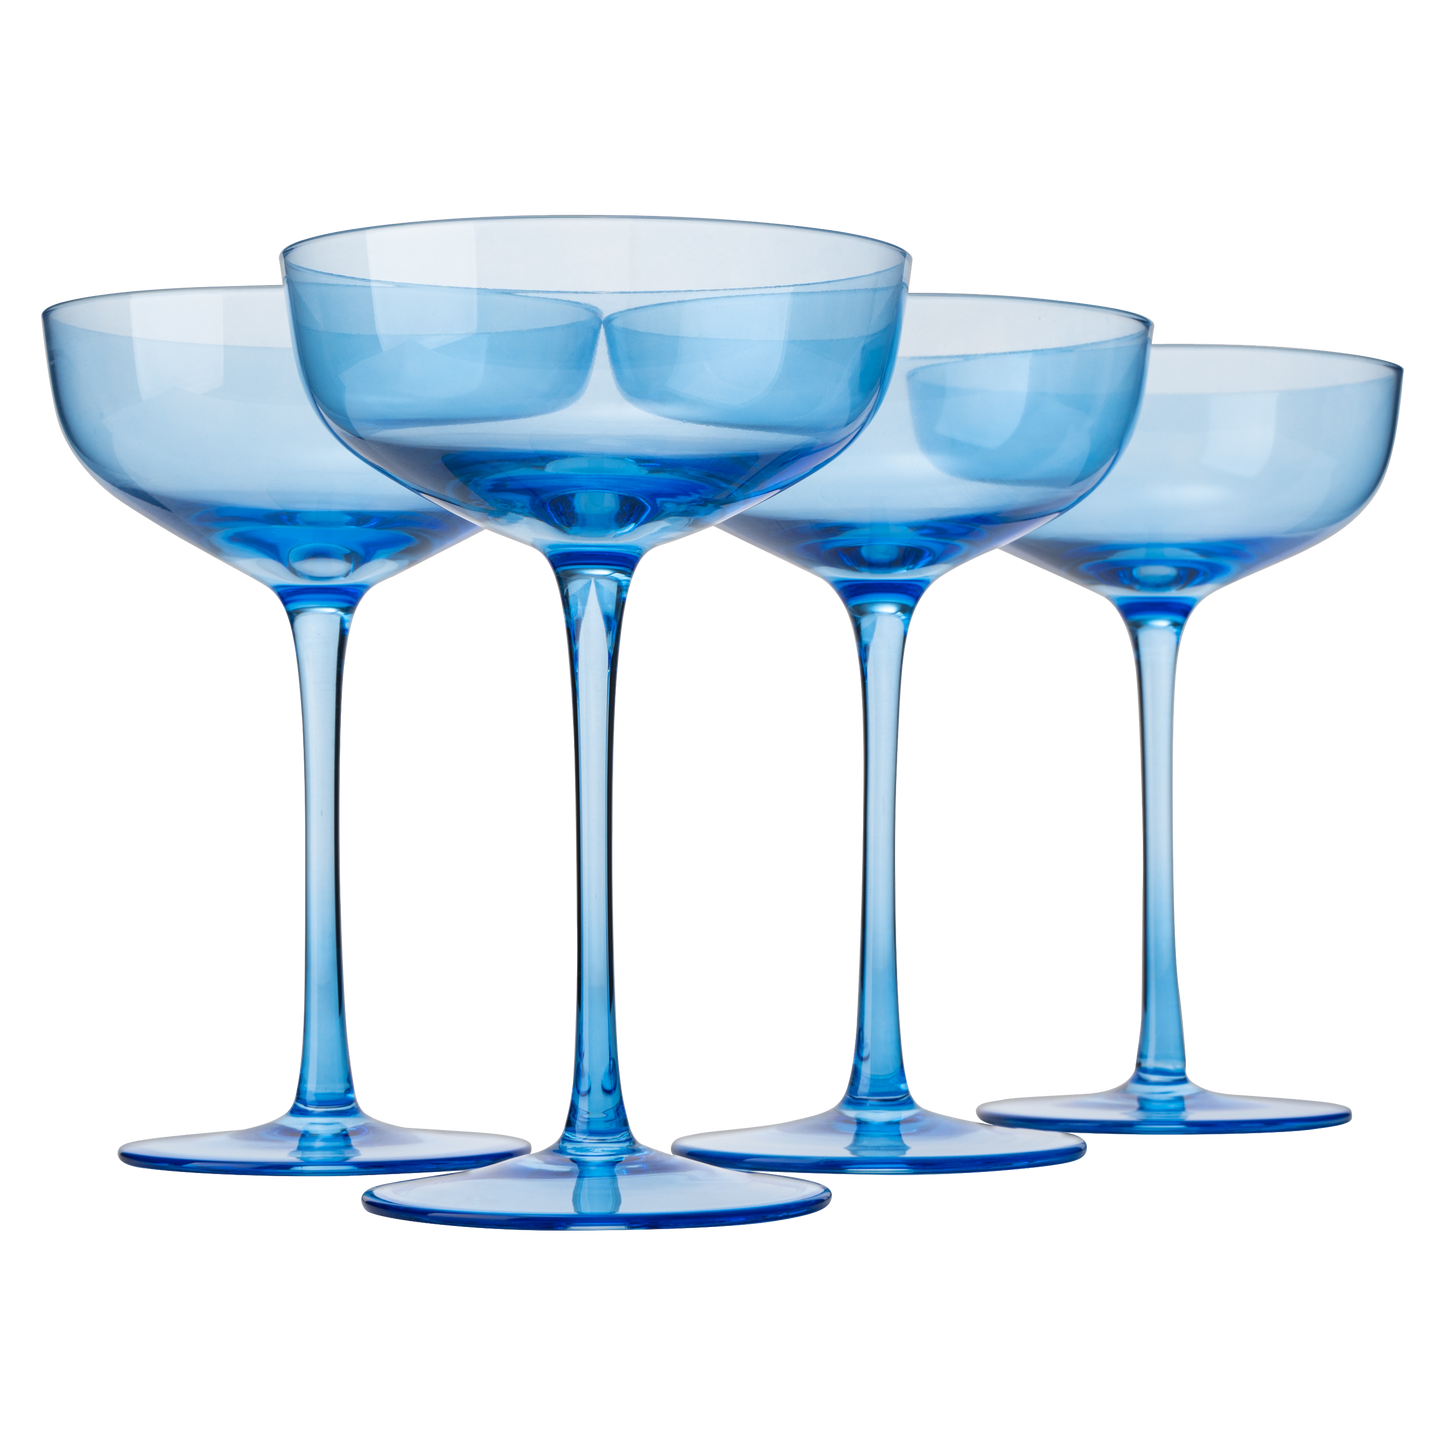 The Wine Savant Colored Coupe Glass | 7oz | Set of 4 Colorful Champagne & Cocktail Glasses, Fancy Manhattan, Crystal Martini, Cocktails Set, Margarita Bar Glassware Gift, Vintage (Blue)-0